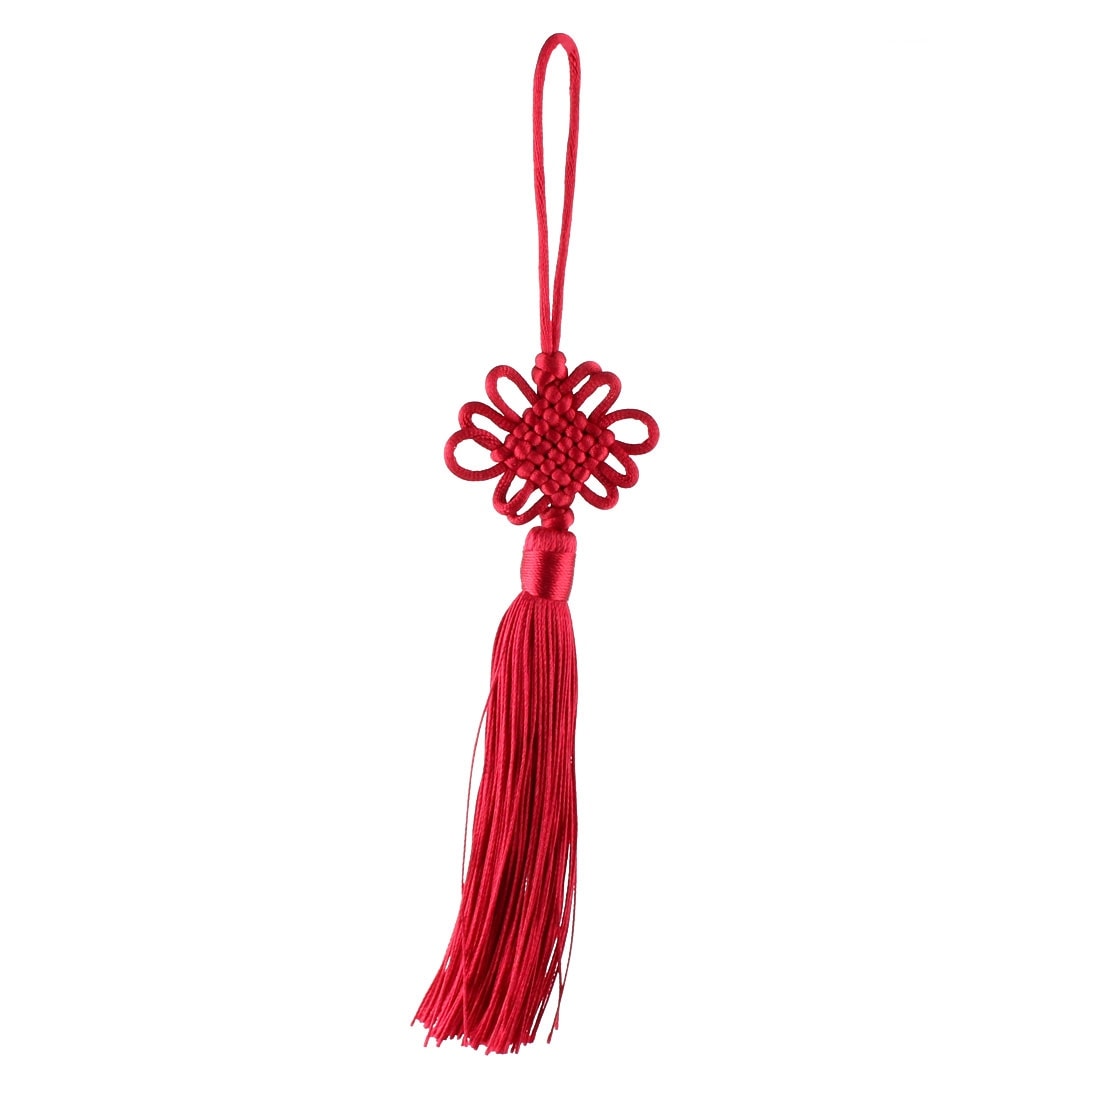 Home Chinese Knot Hanging Ornament Accessories Red Rope Adult Car Ornaments SL 